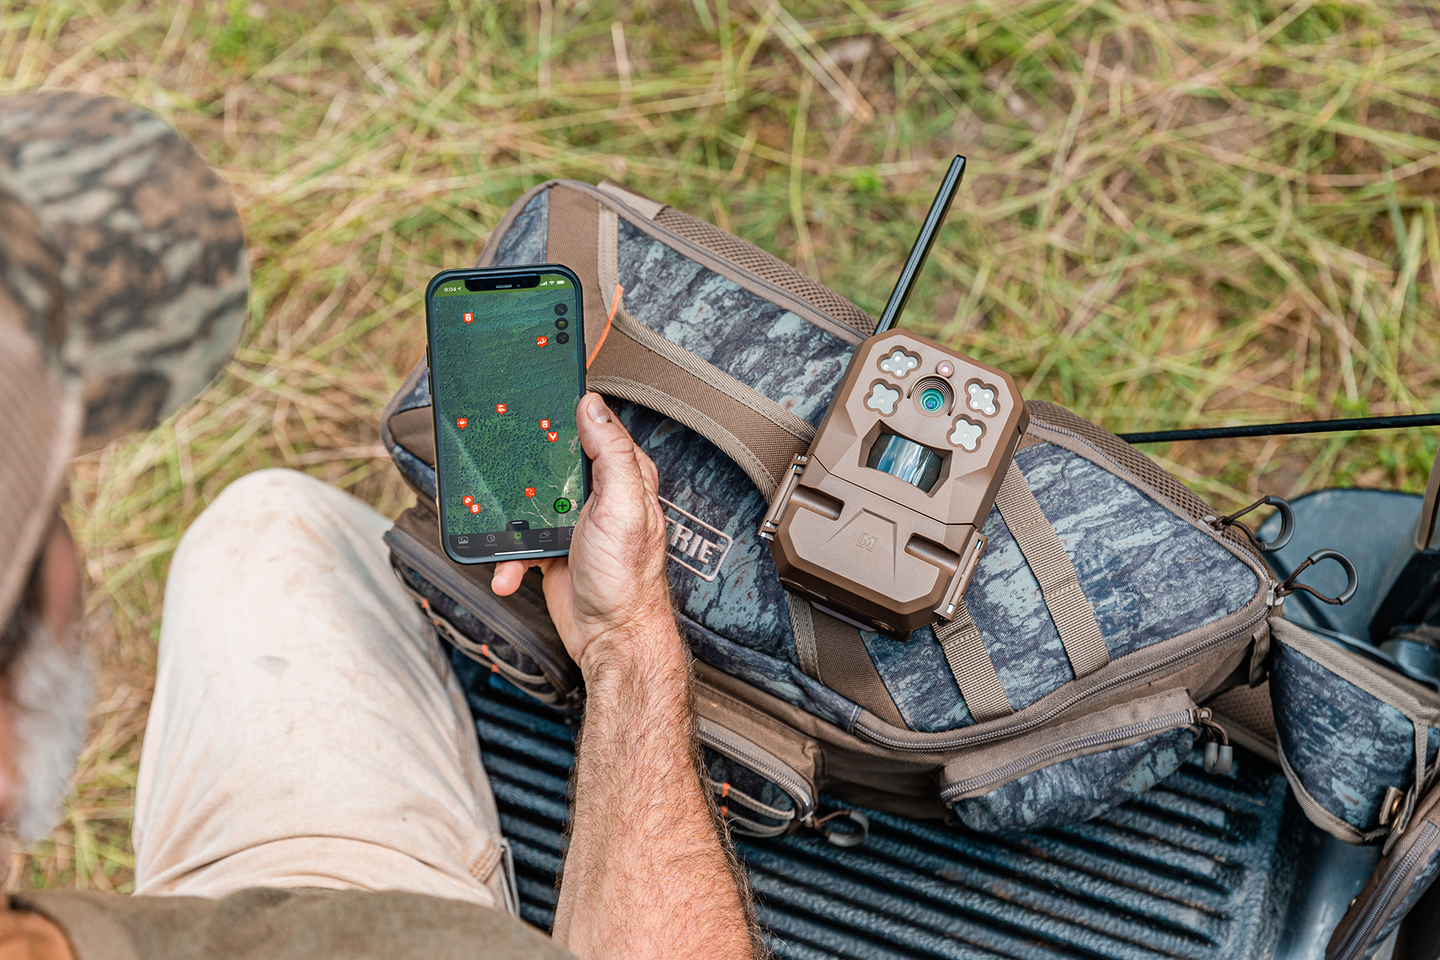 Moultrie Mobile Gives You the Edge You Were Looking For This Hunting Season